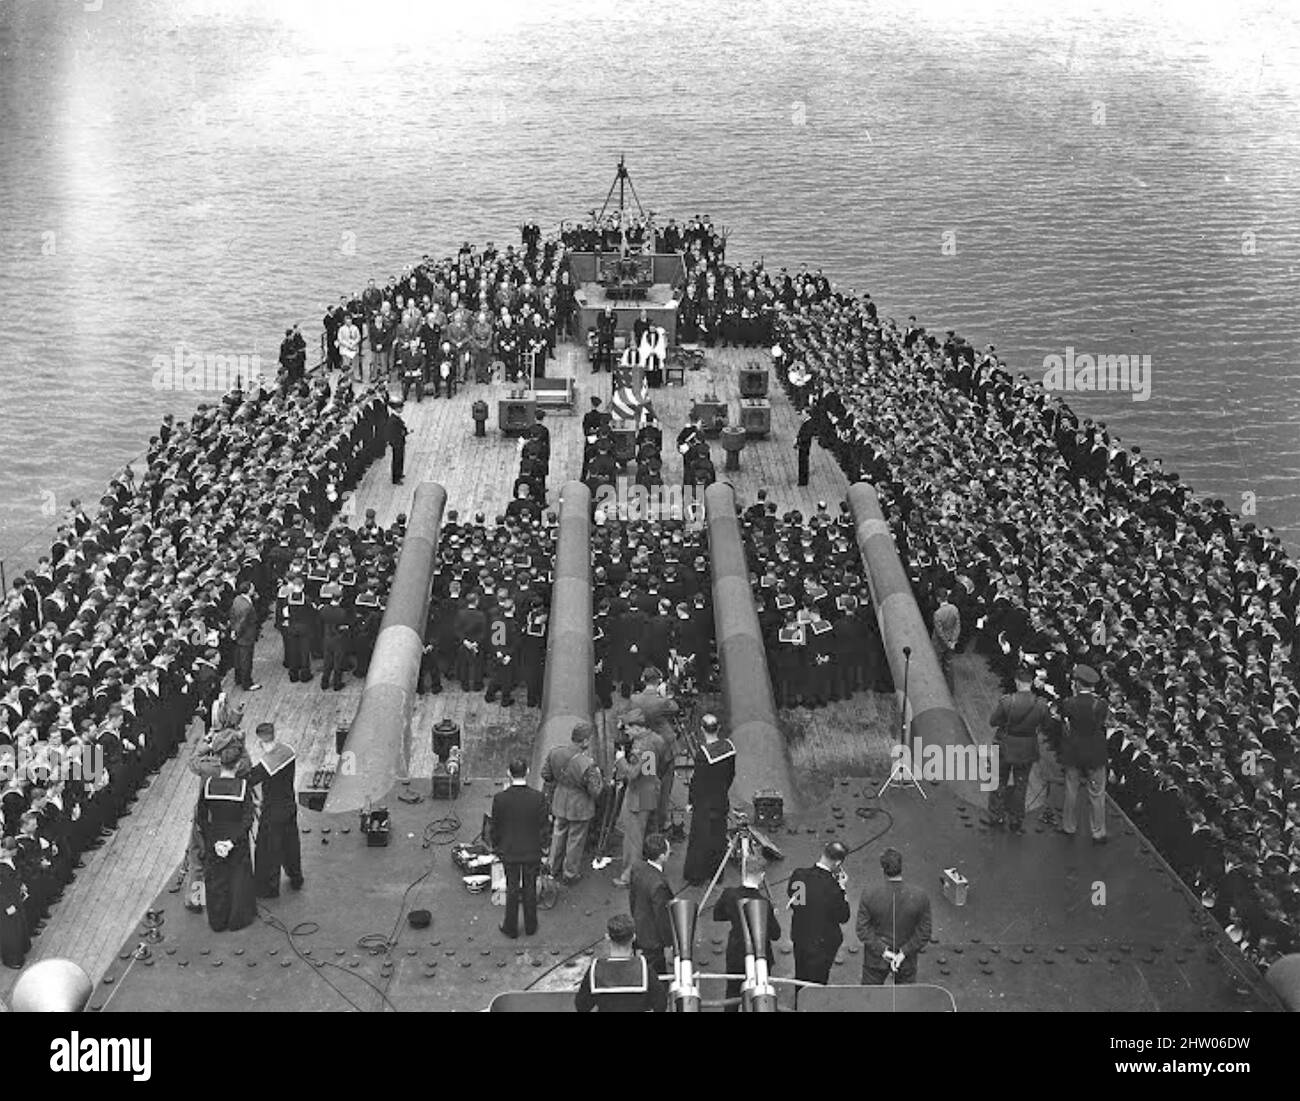 ATLANTIC CONFERENCE (code named Riviera) 9-12 August 1941. Saluting the national anthems aboard  HMS Prince of Wales off the coast  of Newfoundland during the Atlantic Charter Conference between US President Franklin D. Roosevelt and British Prime Minister Winston Churchill Stock Photo